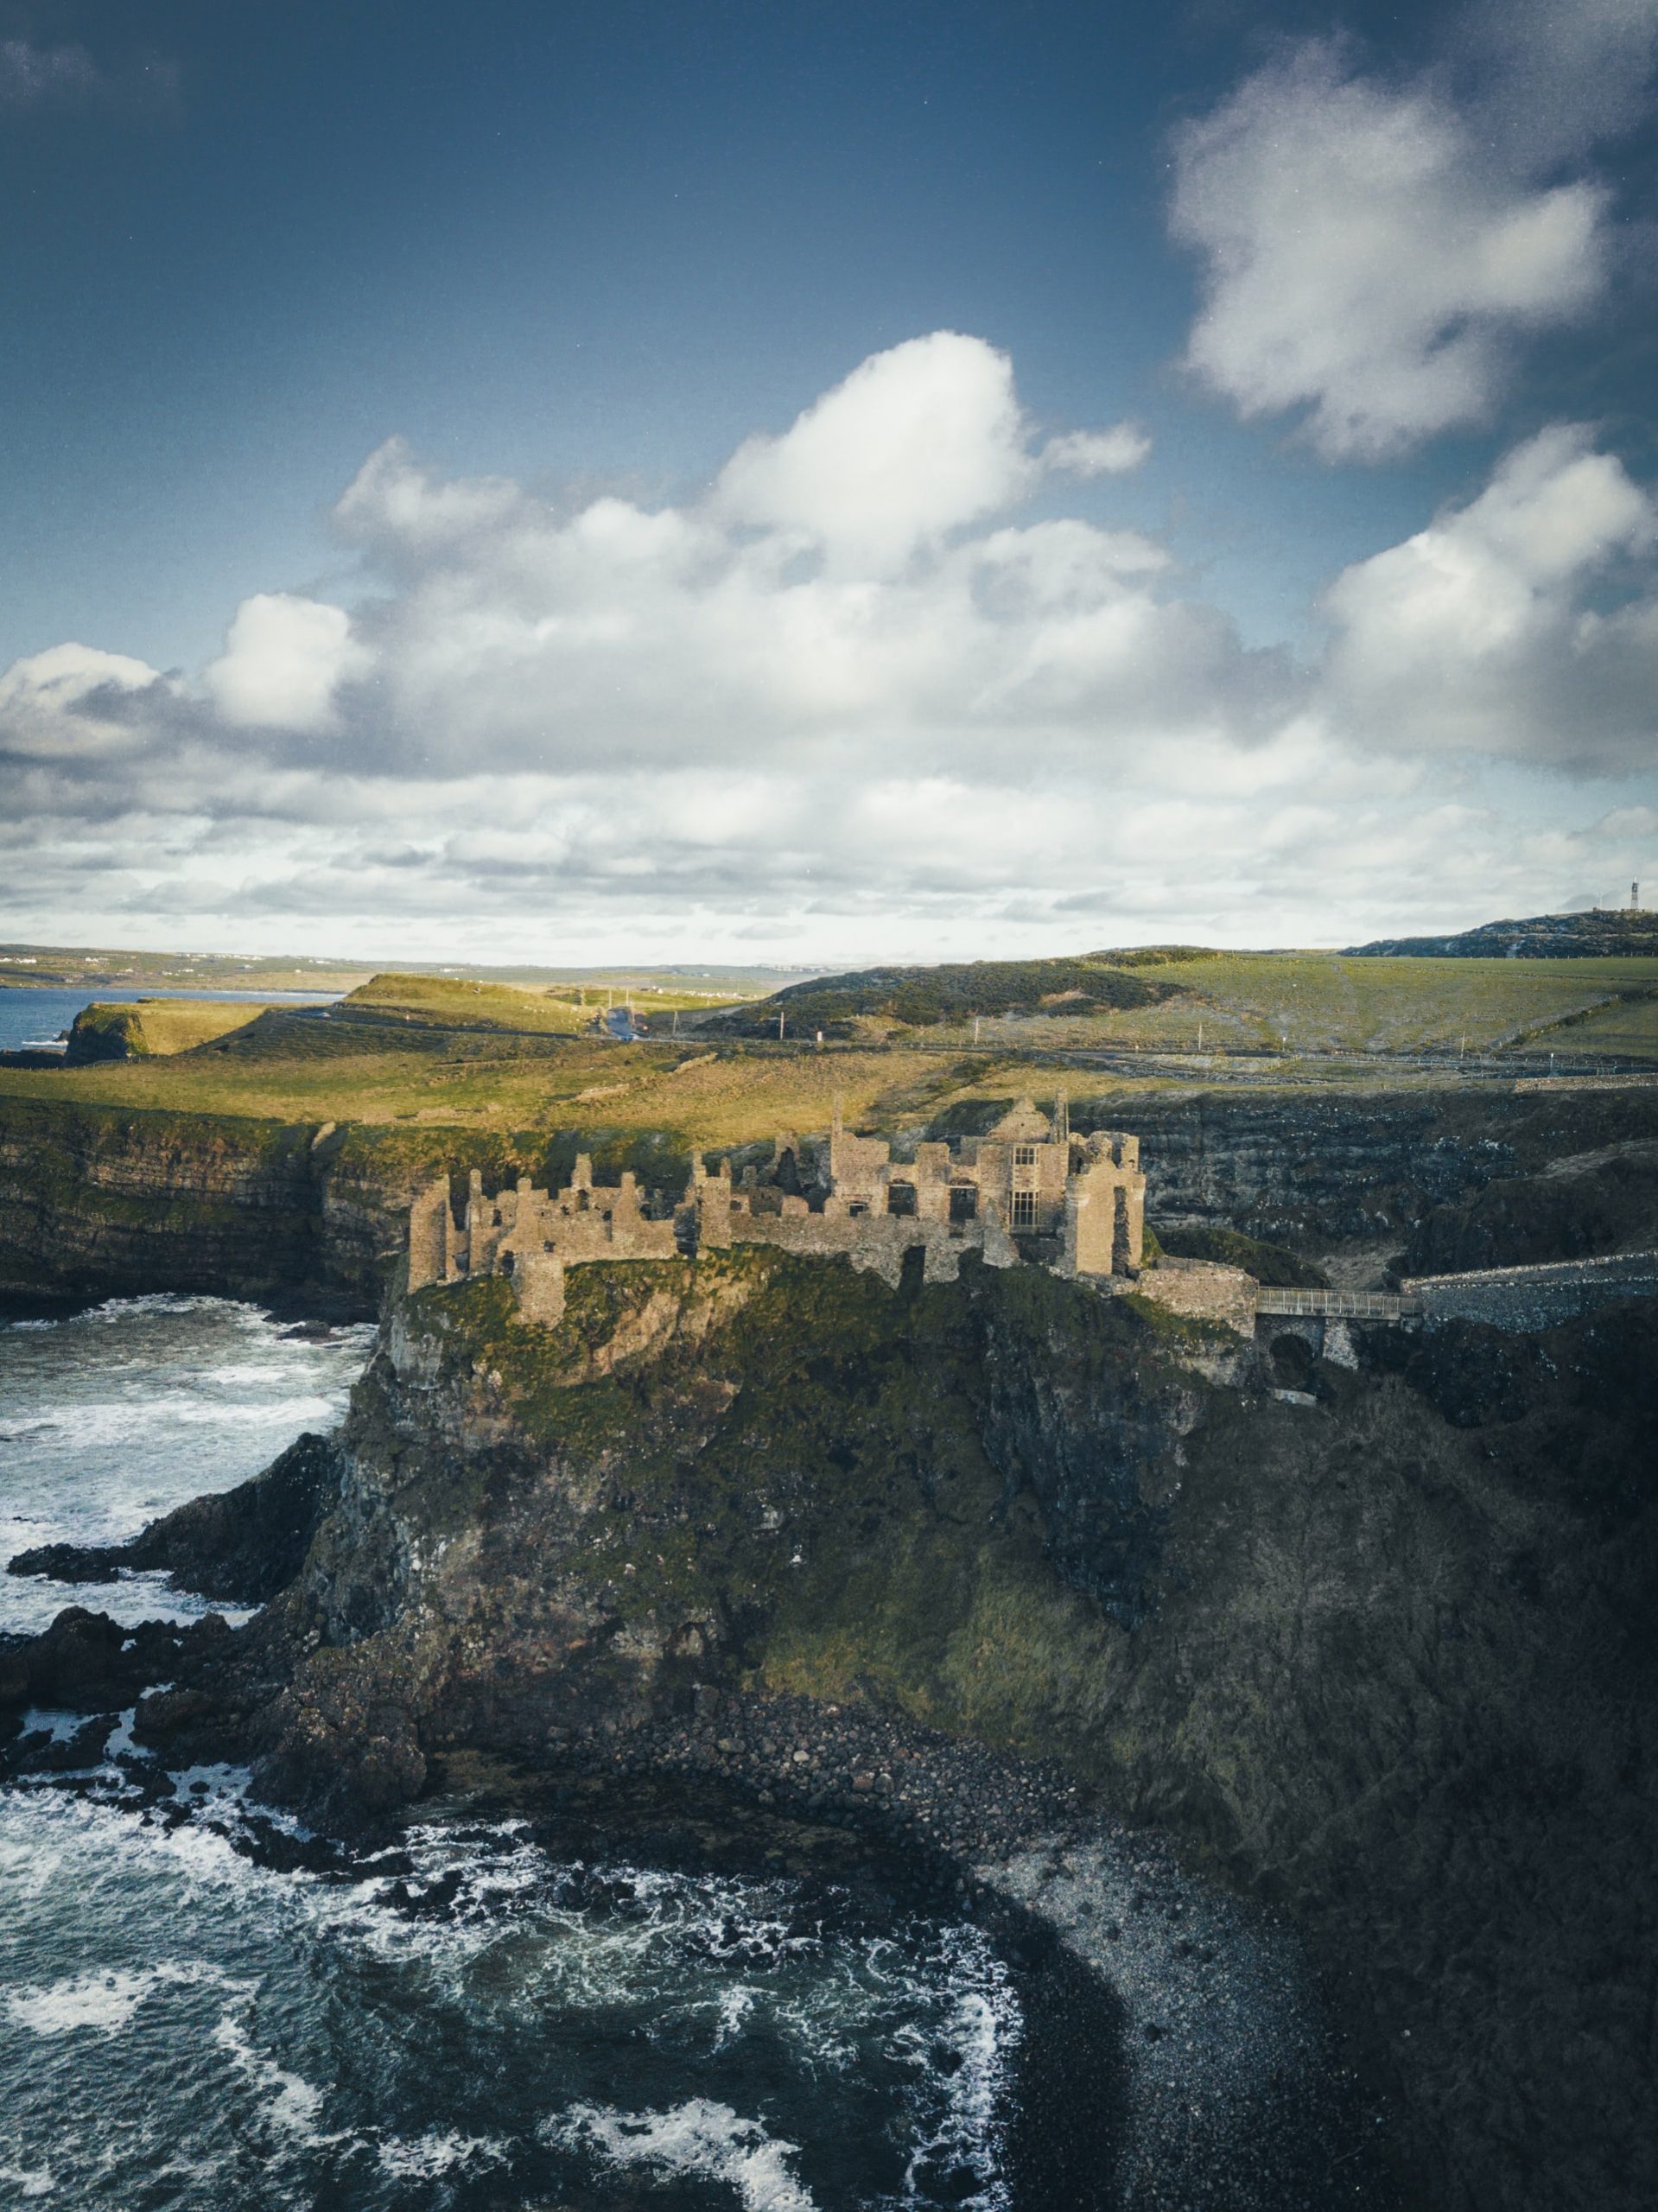 Castle ruins by the cliffs in Ireland